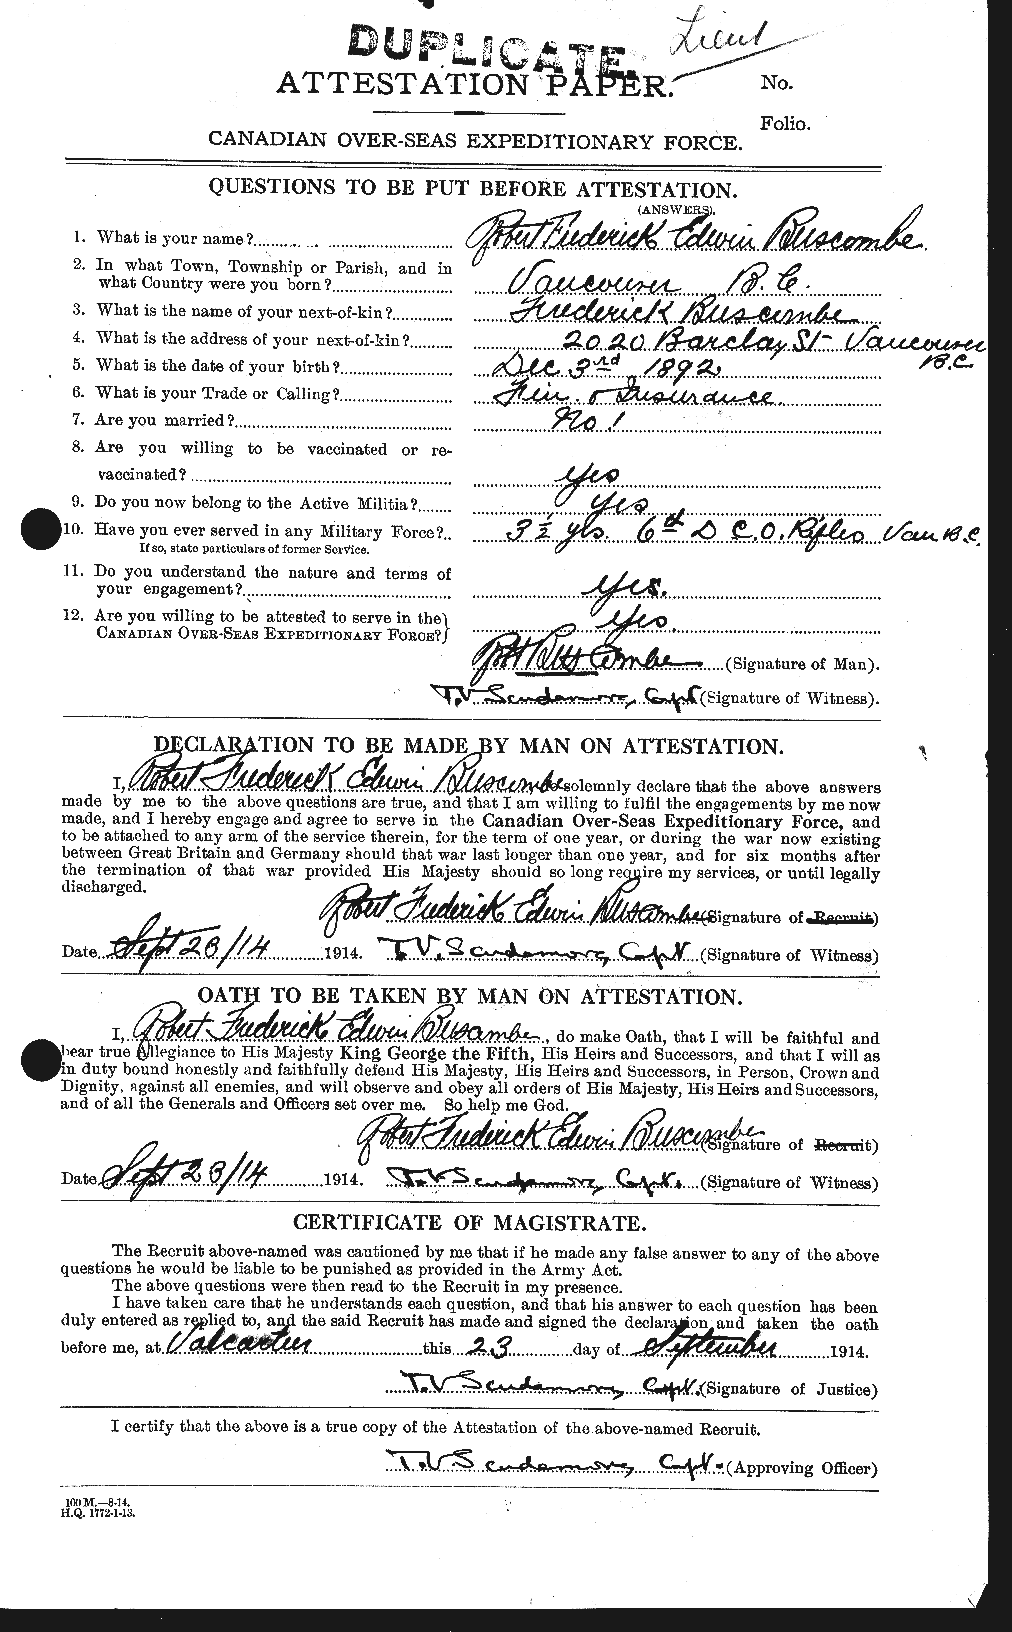 Personnel Records of the First World War - CEF 274310a